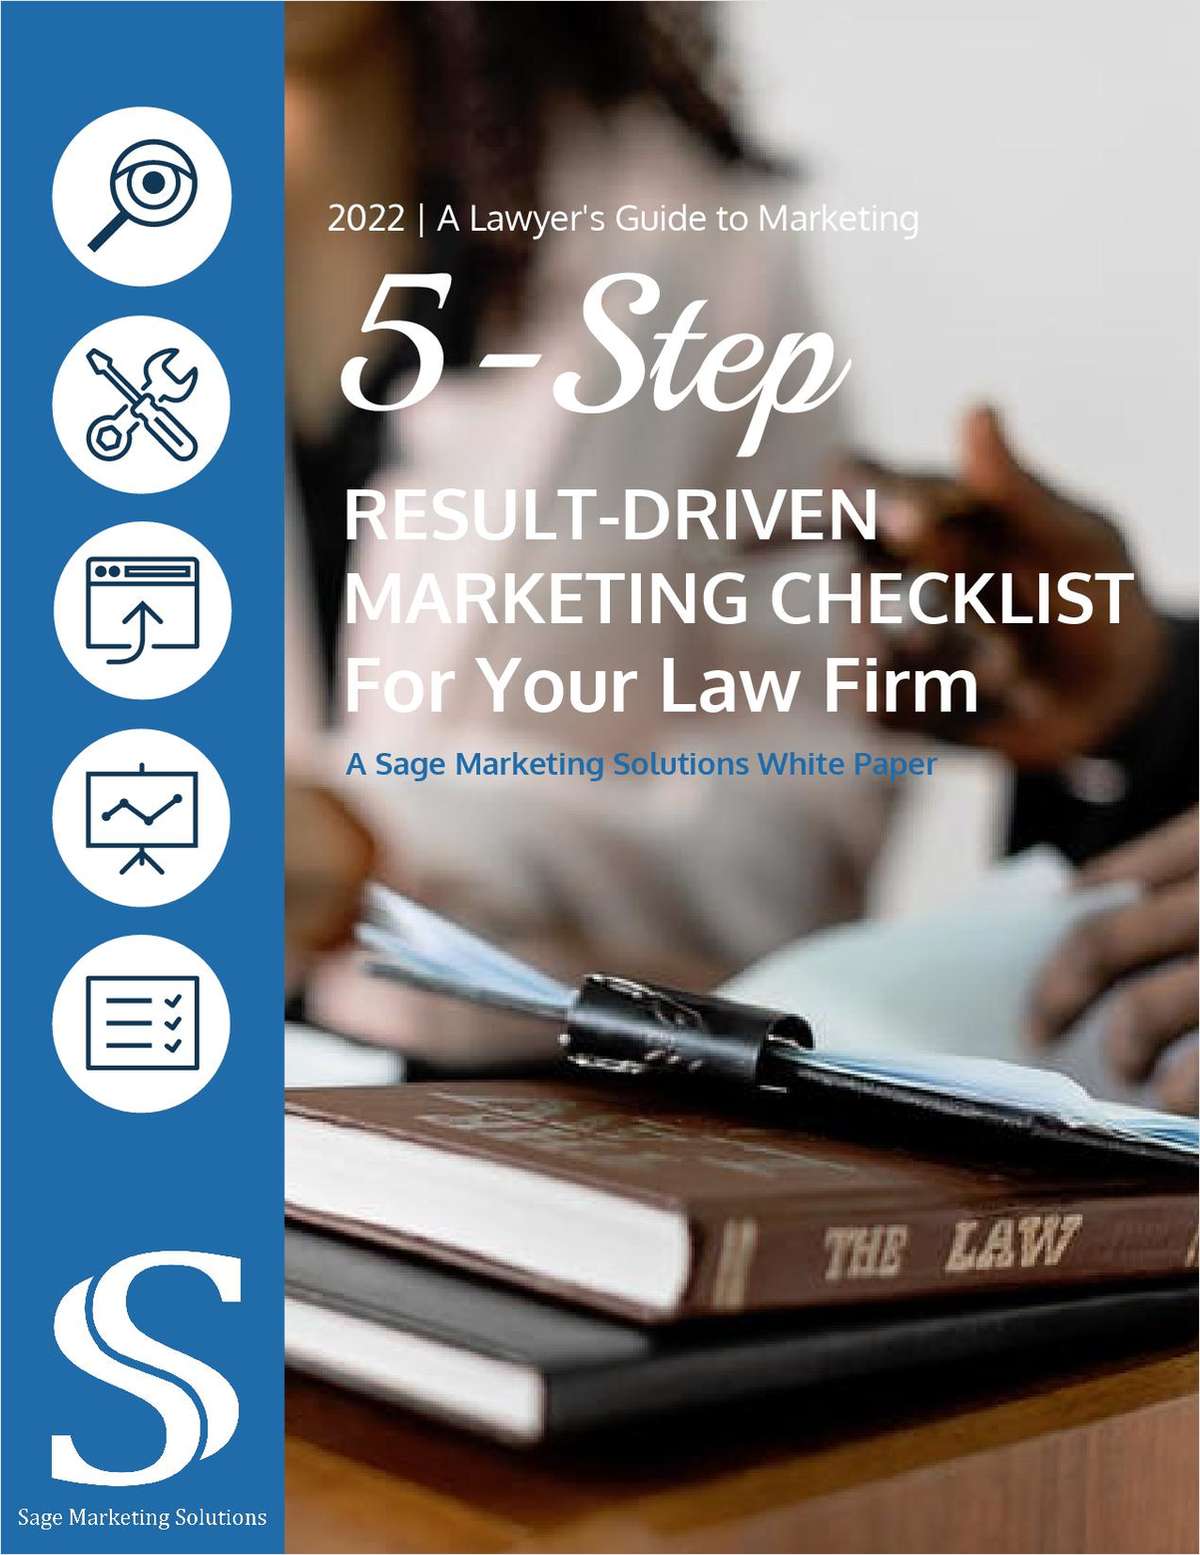 A Lawyer's Guide to Marketing: 5-Step Result-driven Marketing Checklist For Your Law Firm